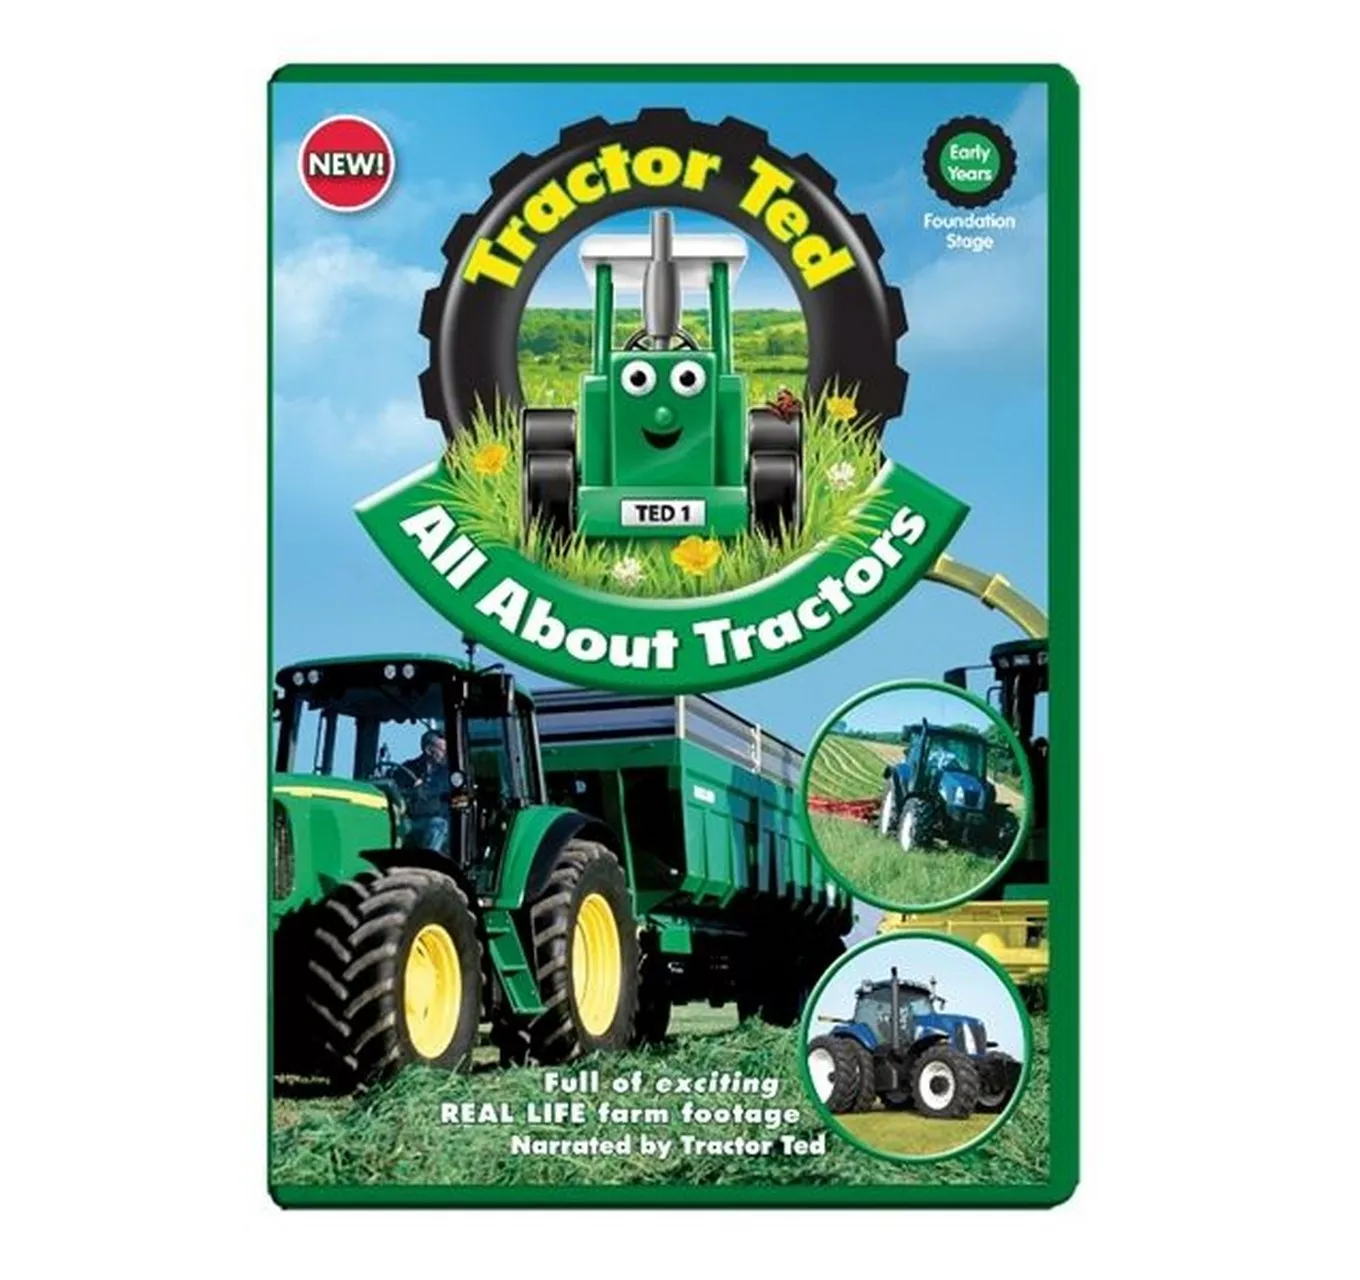 All About Tractors DVD